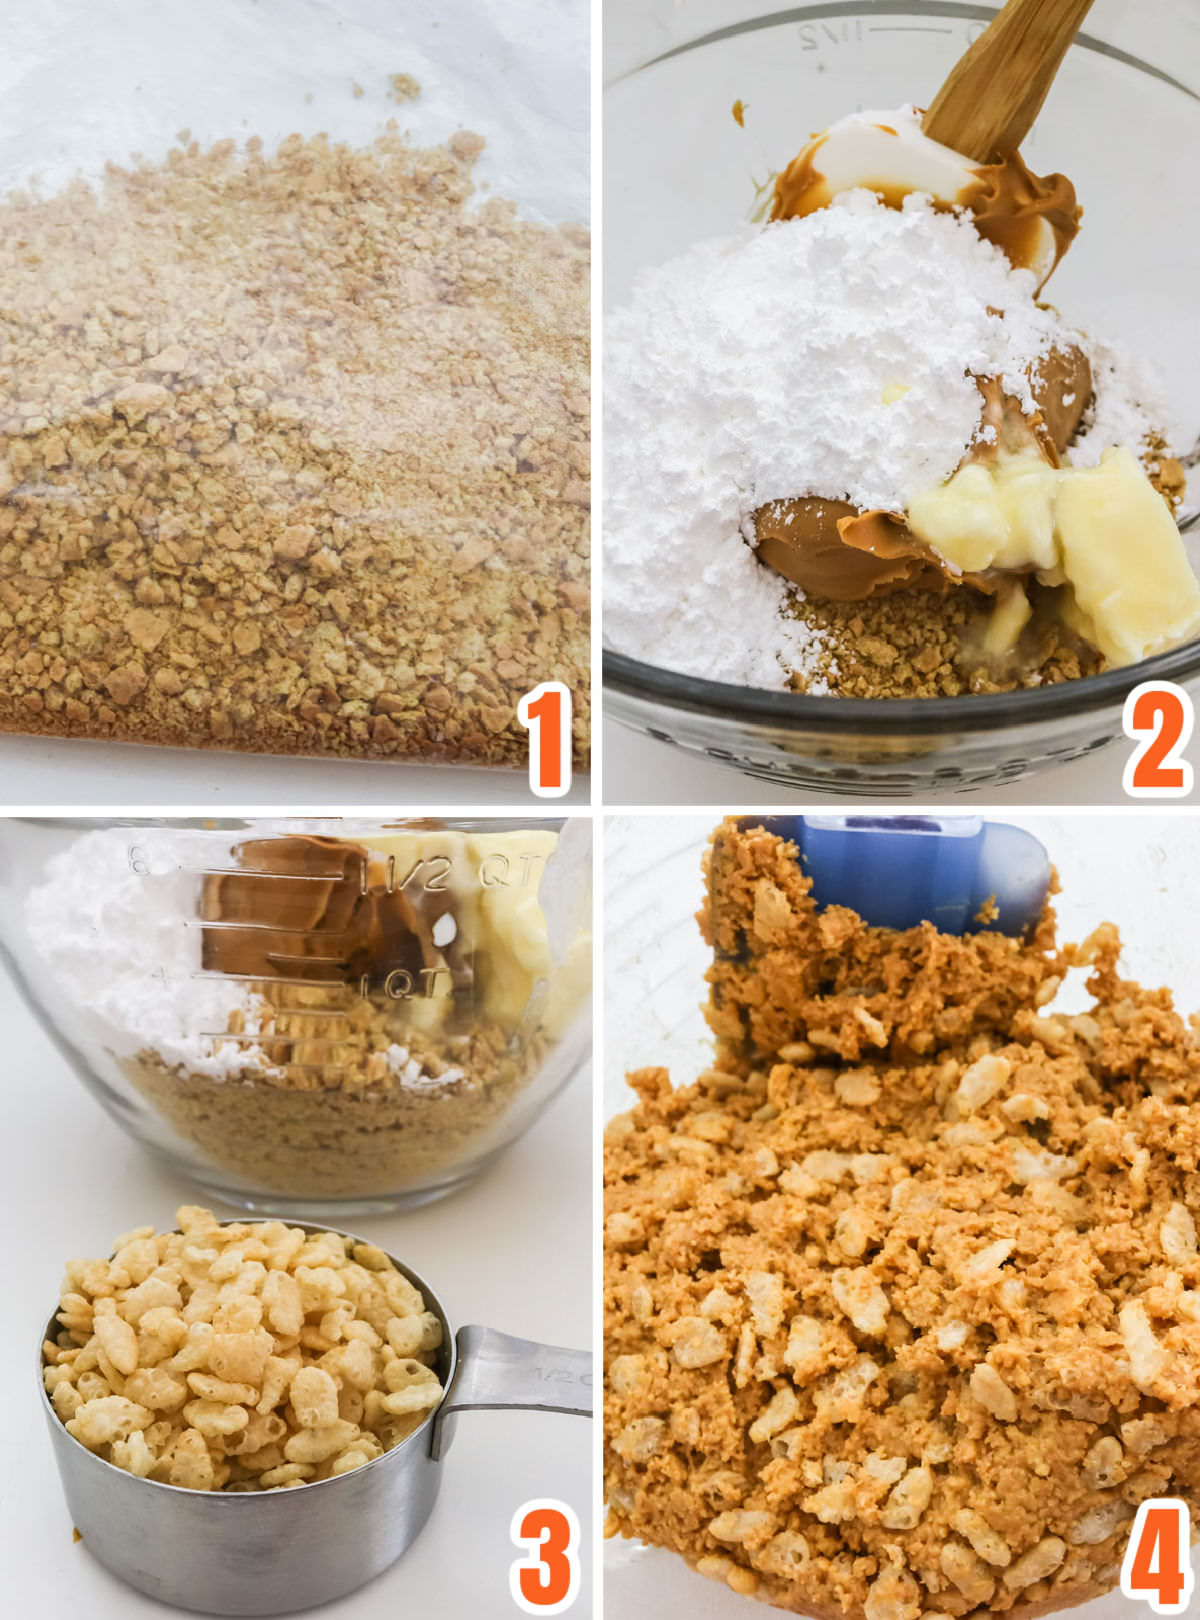 Collage image showing the steps for making the peanut butter filling mixture for the candy balls.